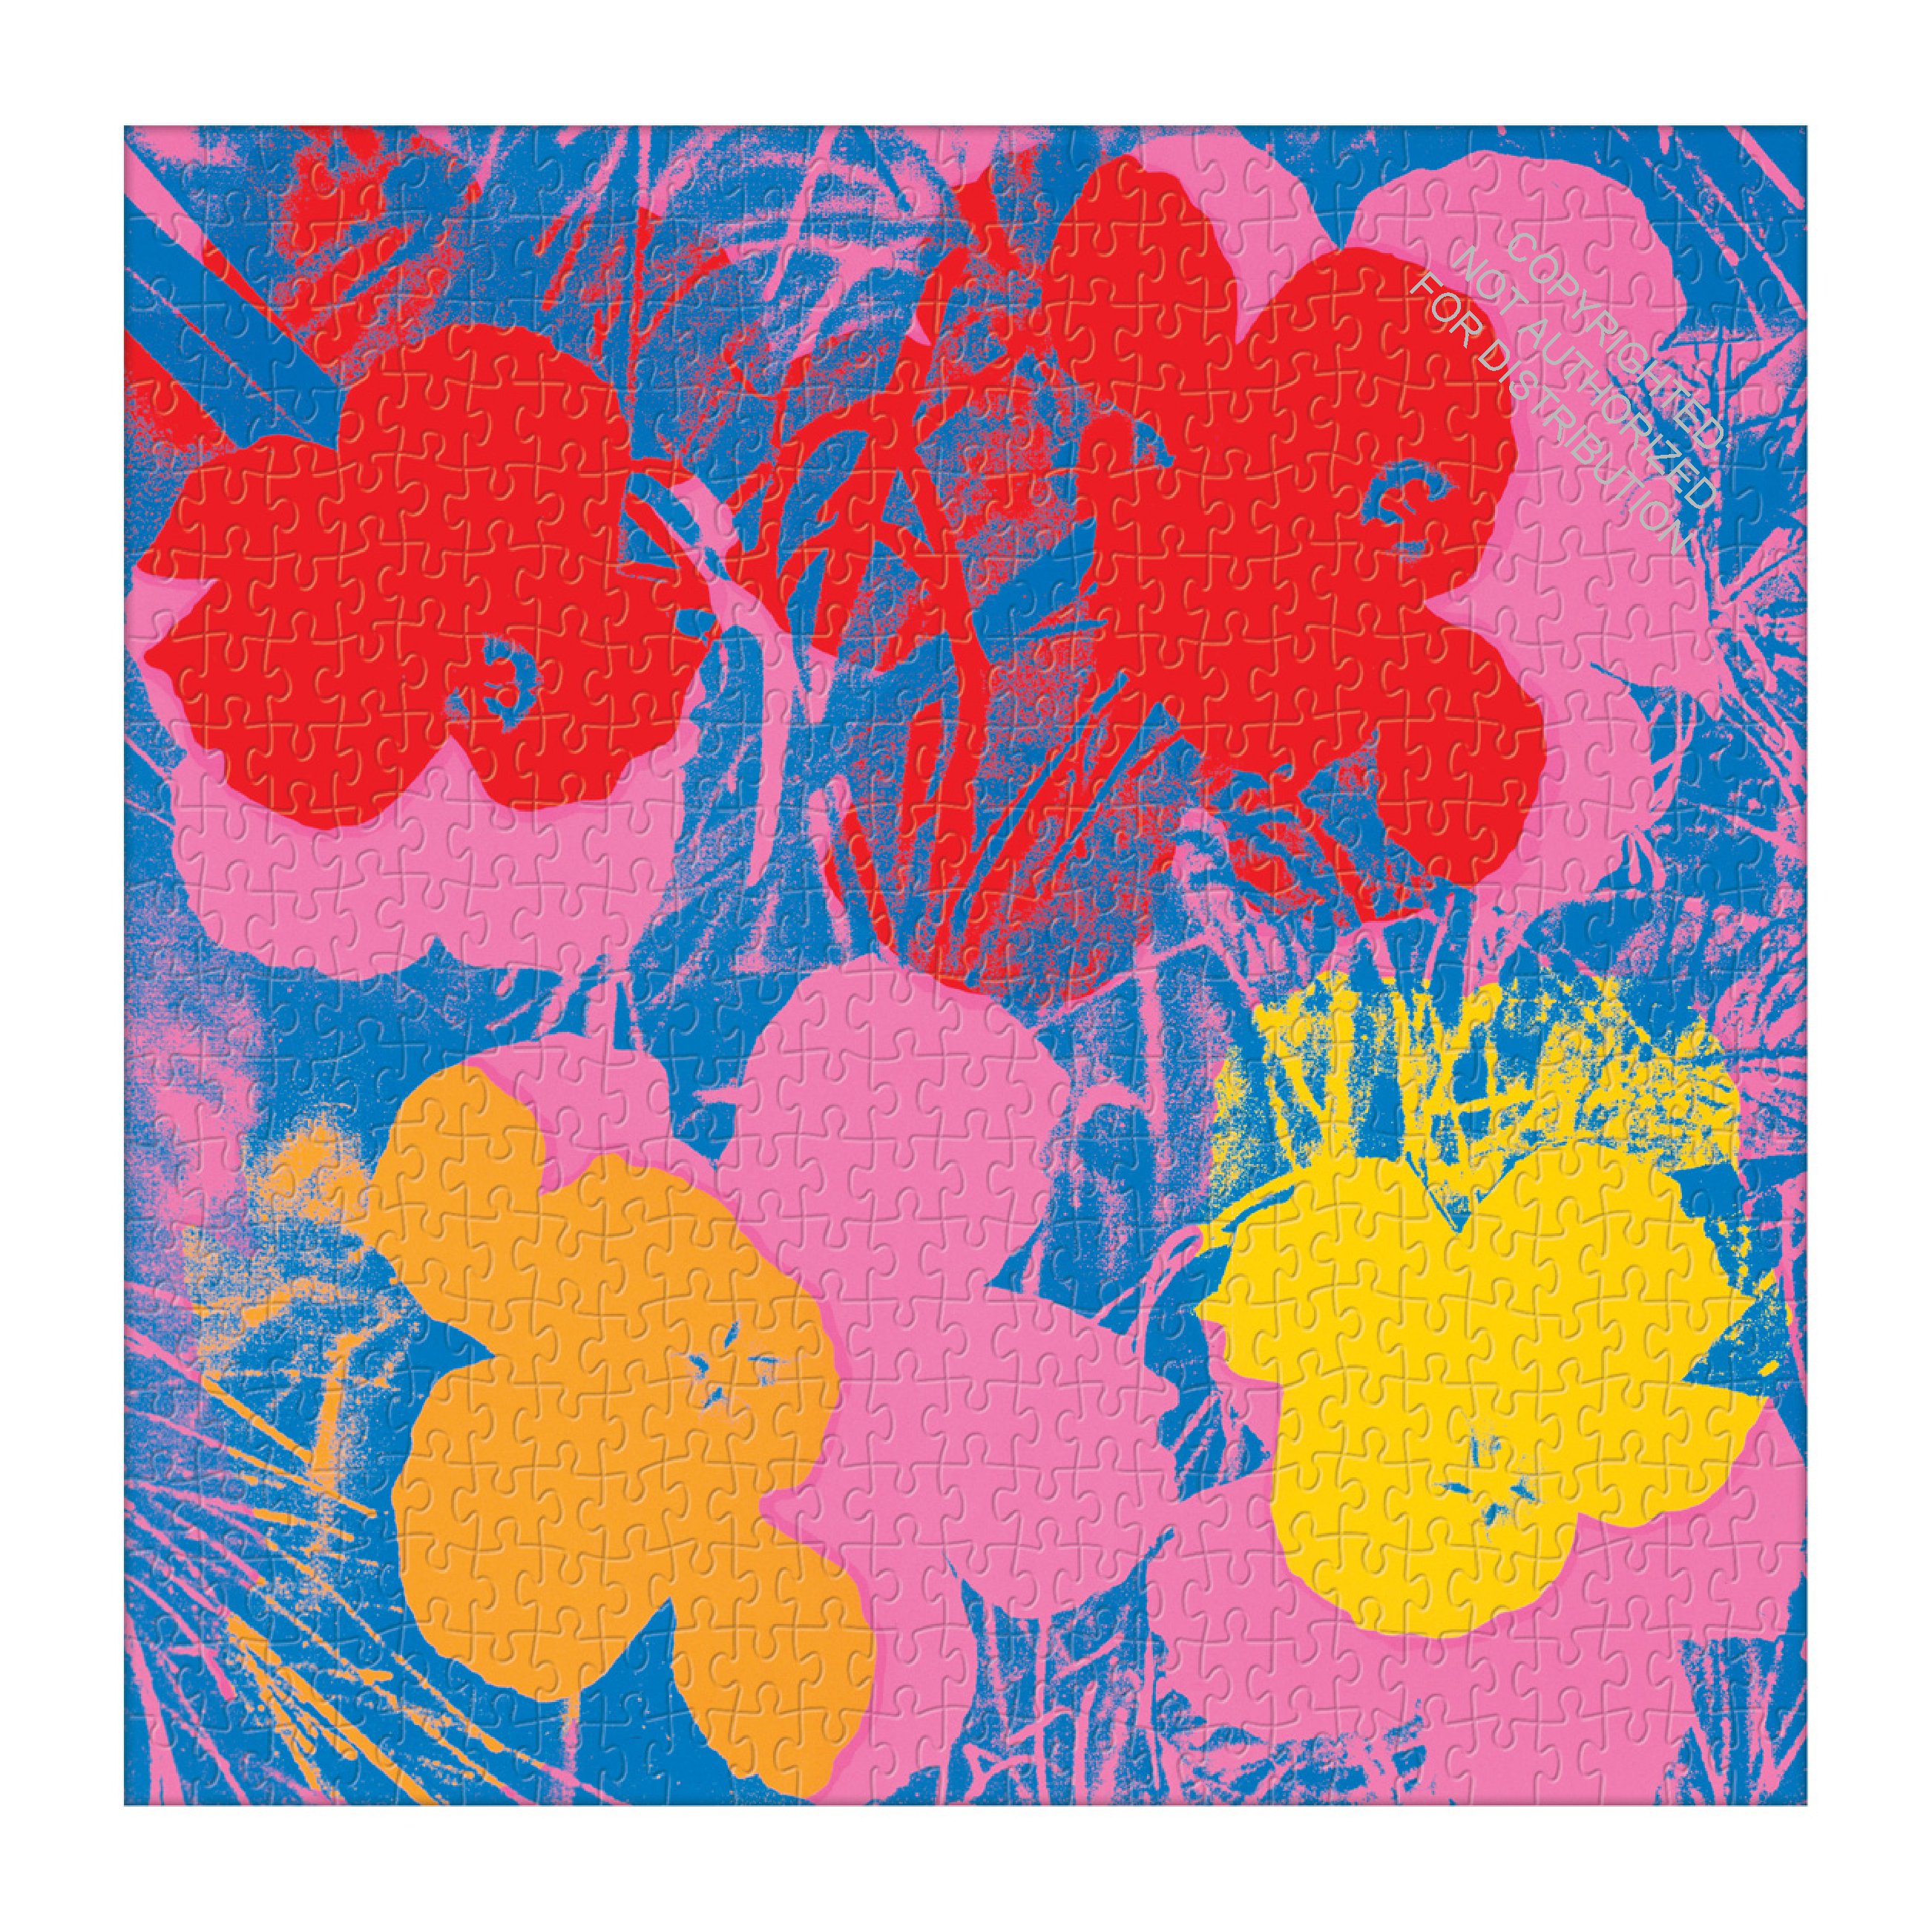 Andy Warhol Flowers 500 Piece Puzzle